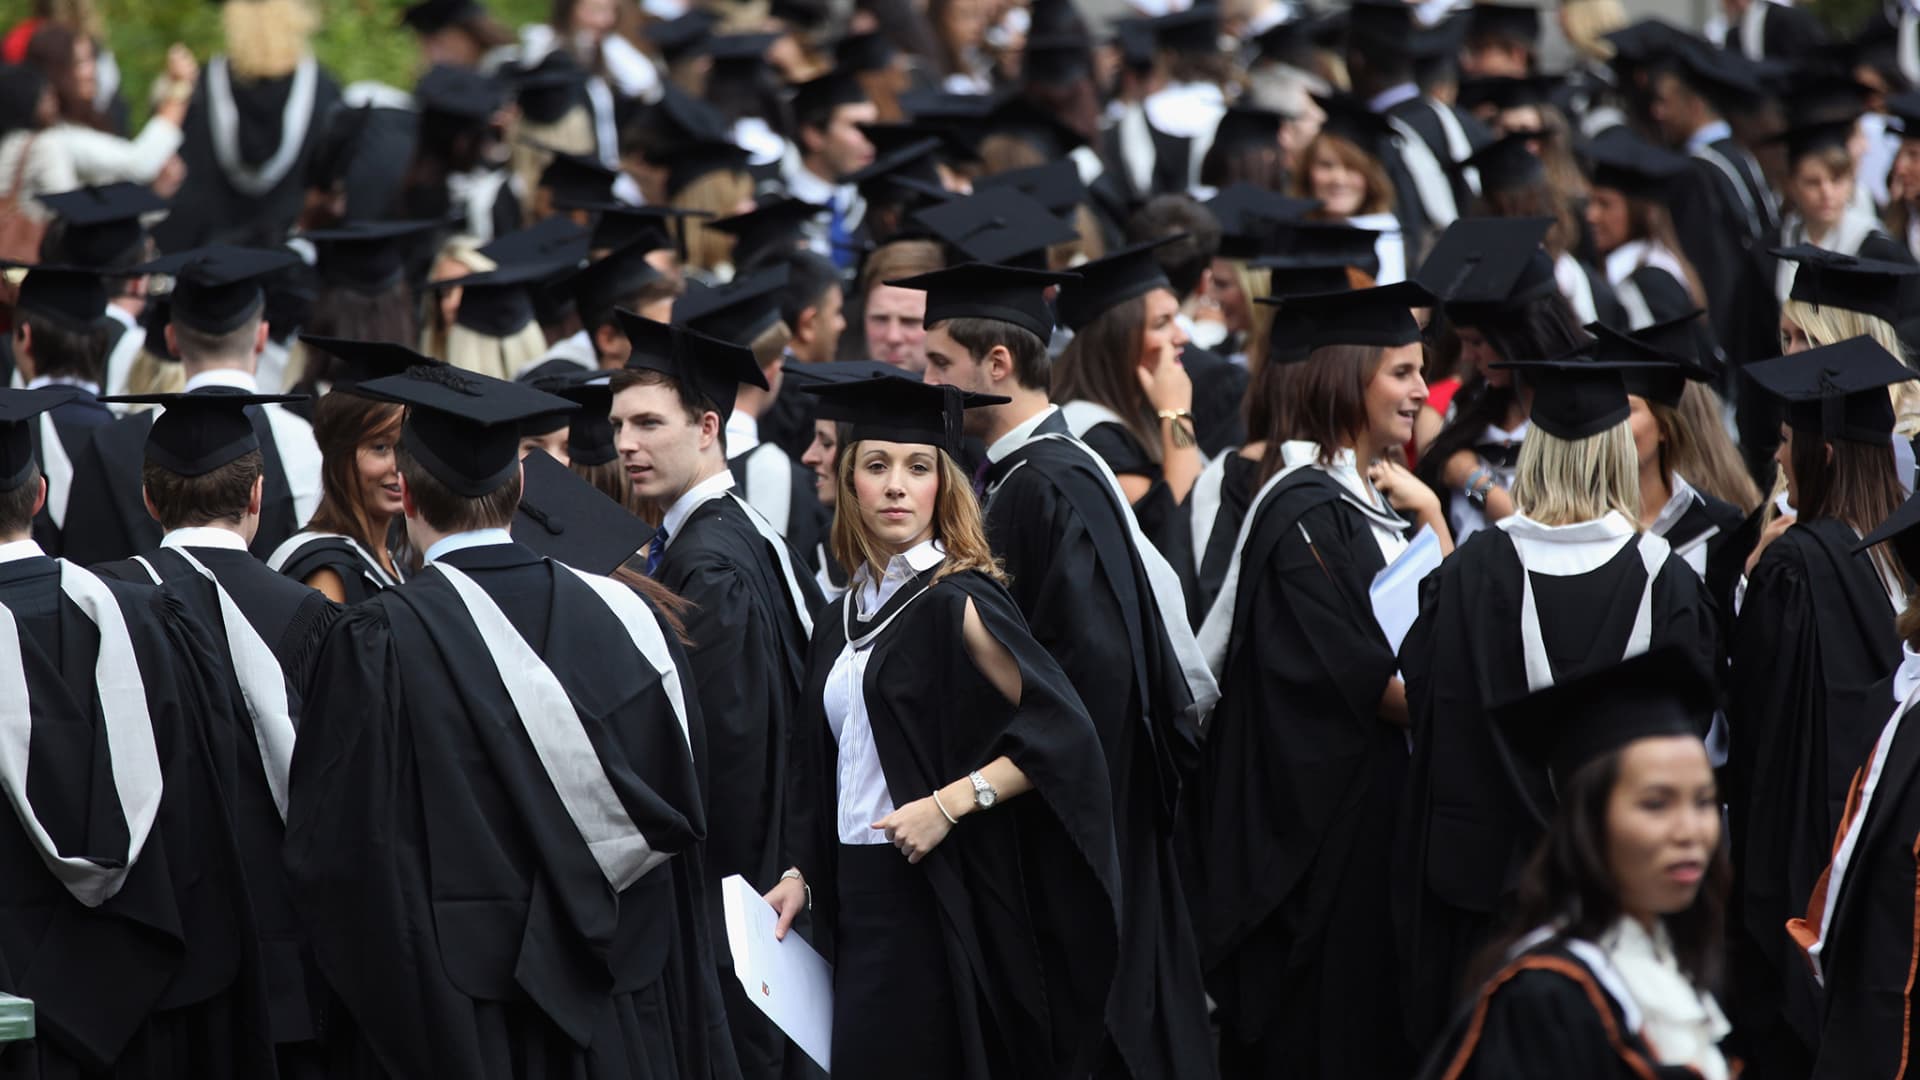 This is how student loan debt became a $1.7 trillion crisis